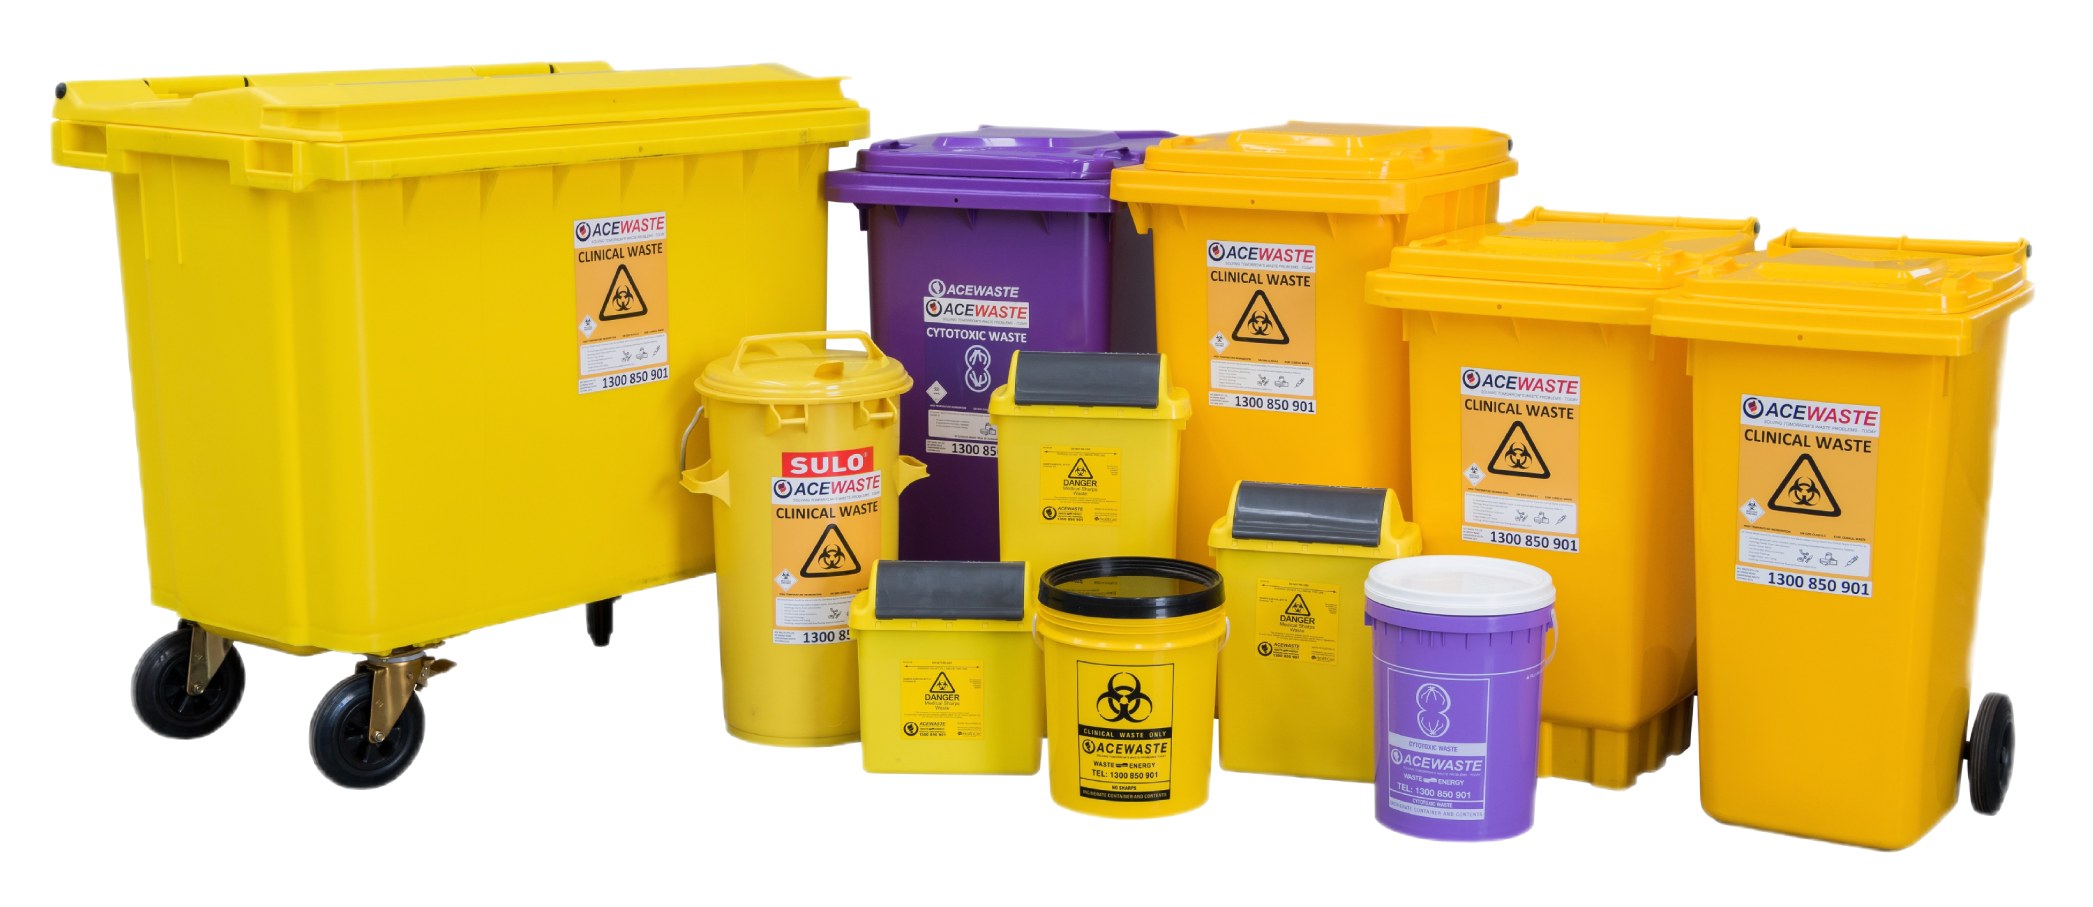 Ace Waste Hospital waste bins and containers